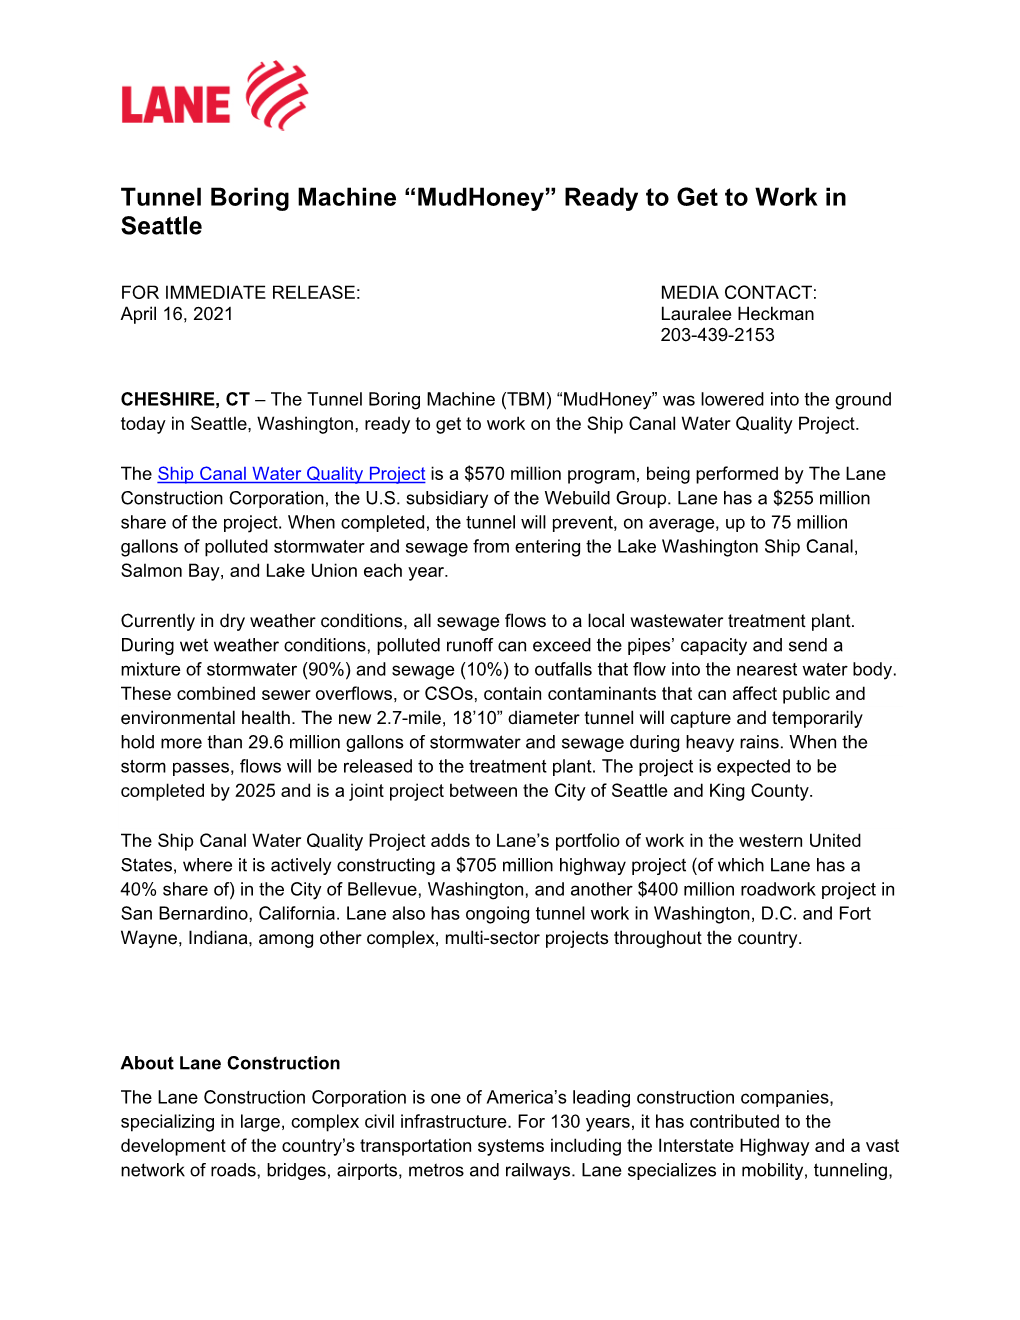 Tunnel Boring Machine “Mudhoney” Ready to Get to Work in Seattle